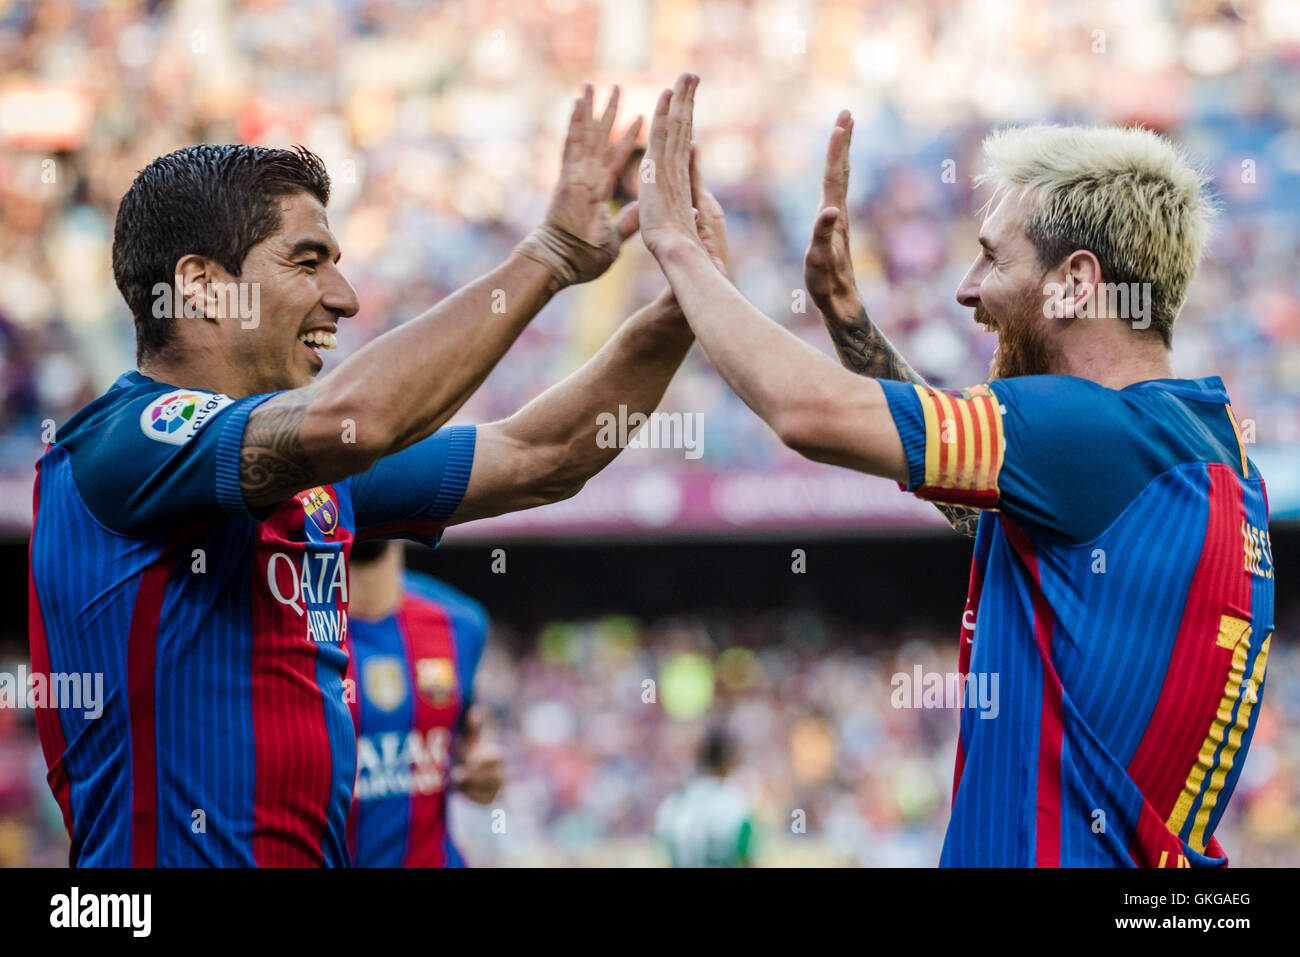 Barcelona, Catalonia, Spain. 20th Aug, 2016. FC Barcelona forward MESSI celebrates a goal with theammates during the BBVA league match against Real Betis at the Camp Nou stadium in Barcelona Credit:  Matthias Oesterle/ZUMA Wire/Alamy Live News Stock Photo